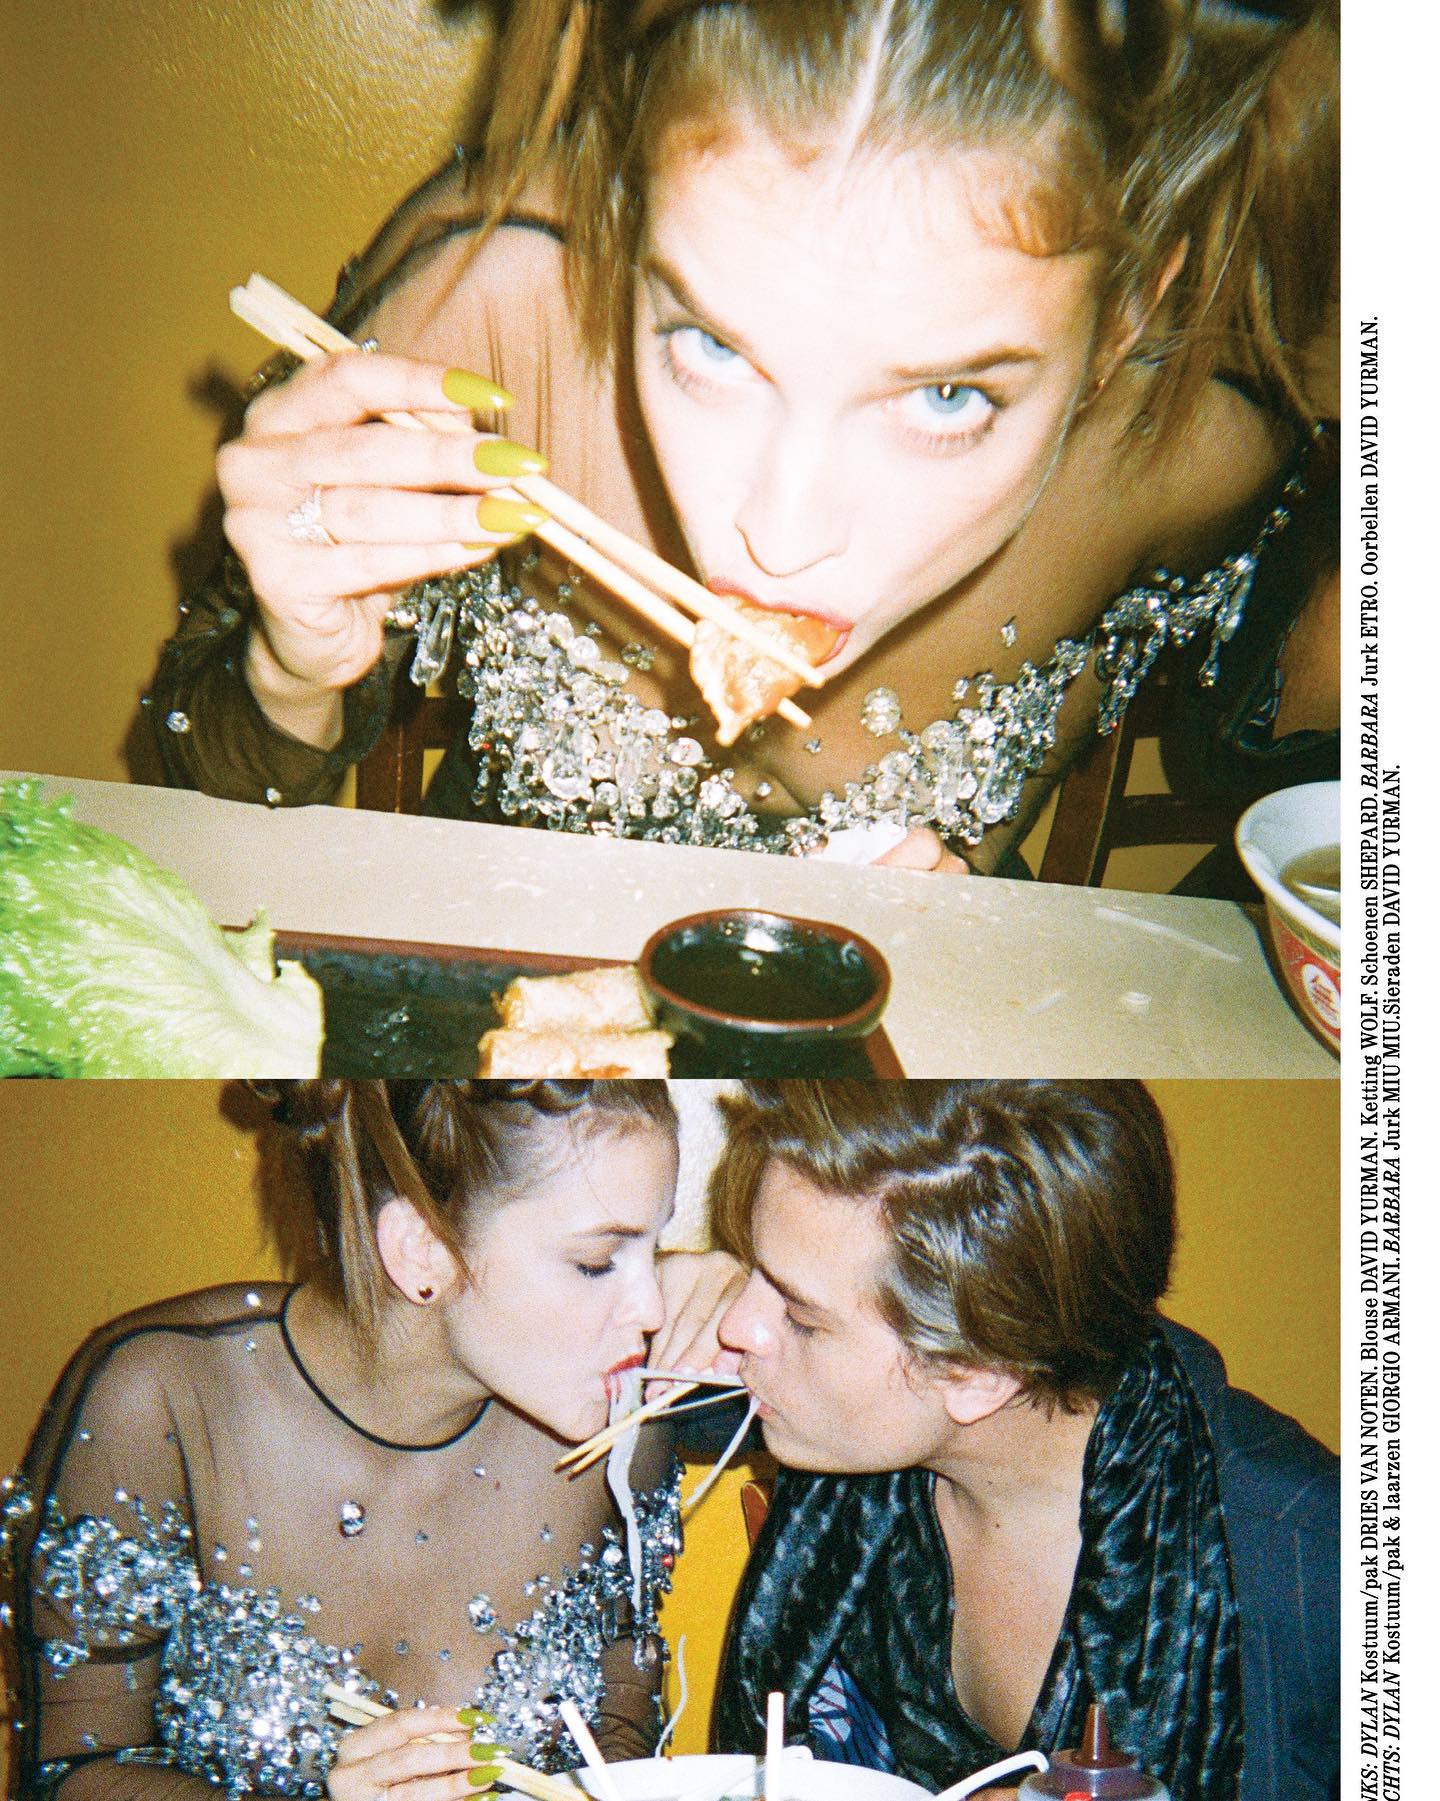 Barbara Palvin and Dylan Sprouse Hit the Cover! - Photo 13